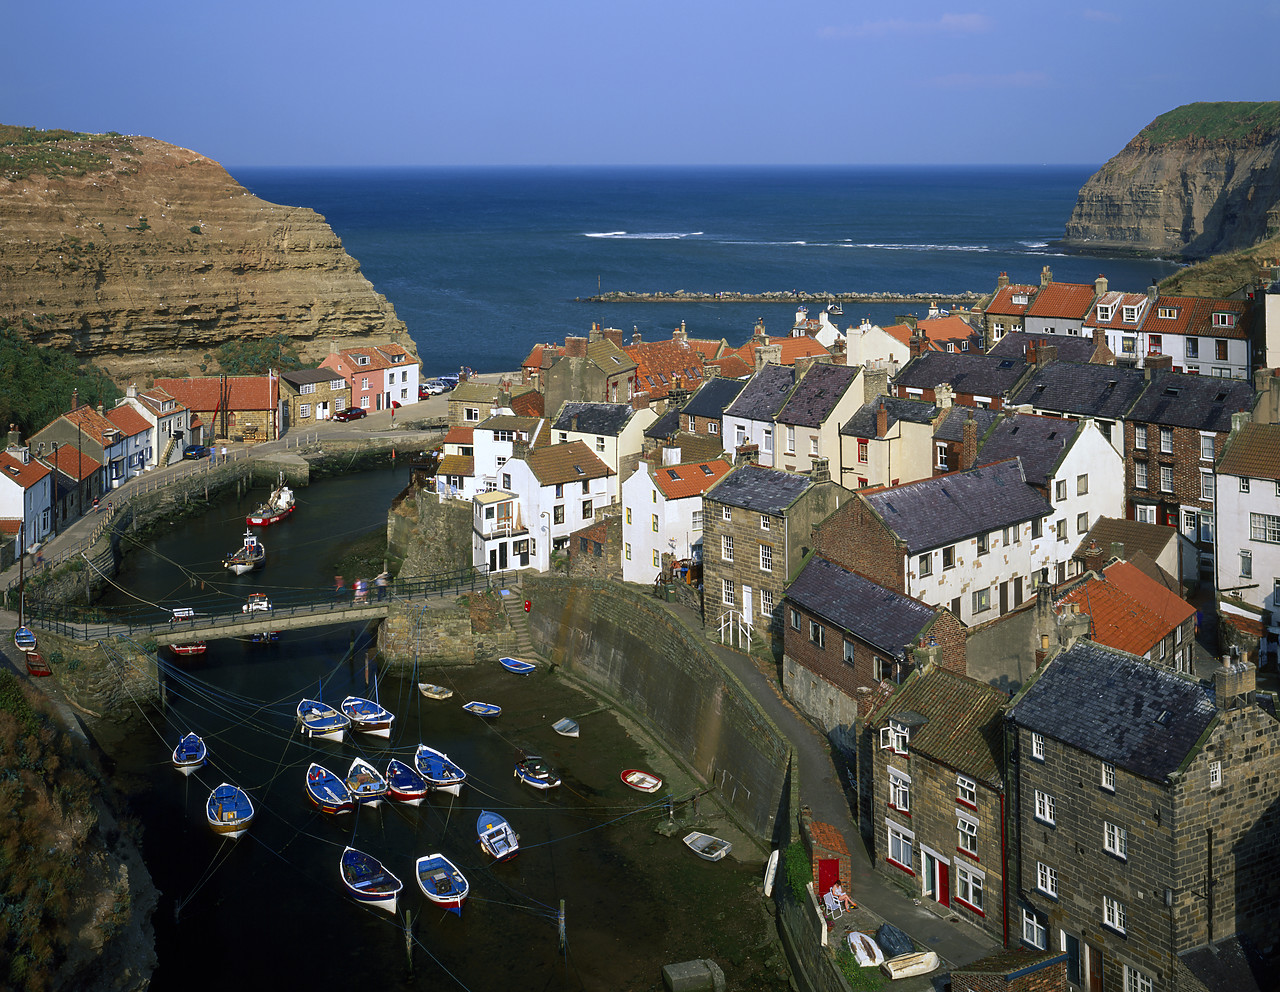 #980990-1 - Staithes, North Yorkshire, England